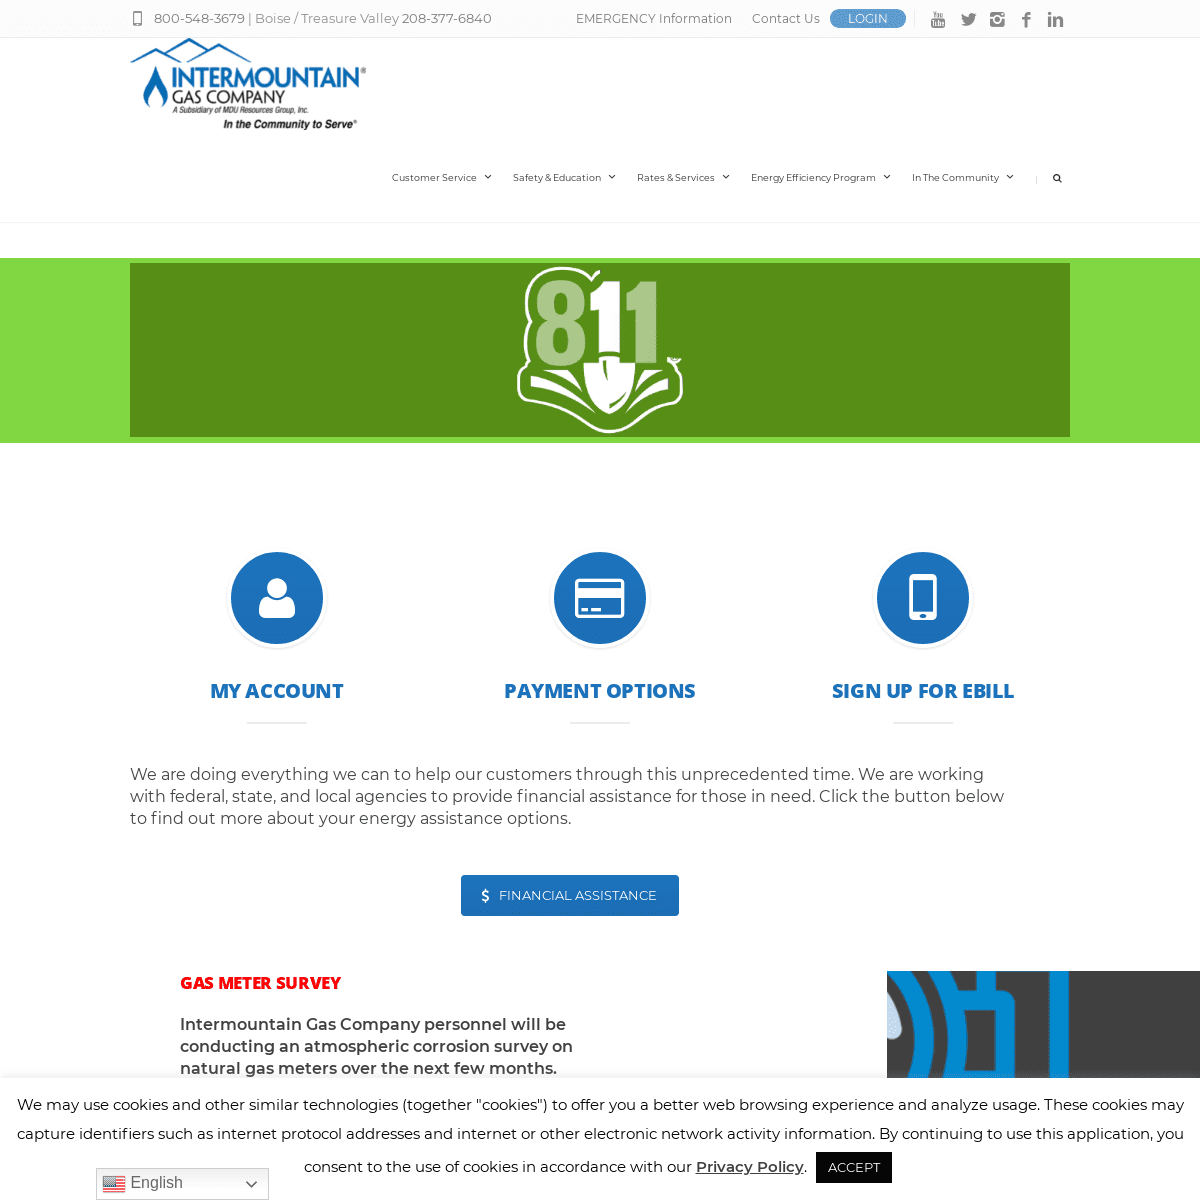 A complete backup of https://intgas.com